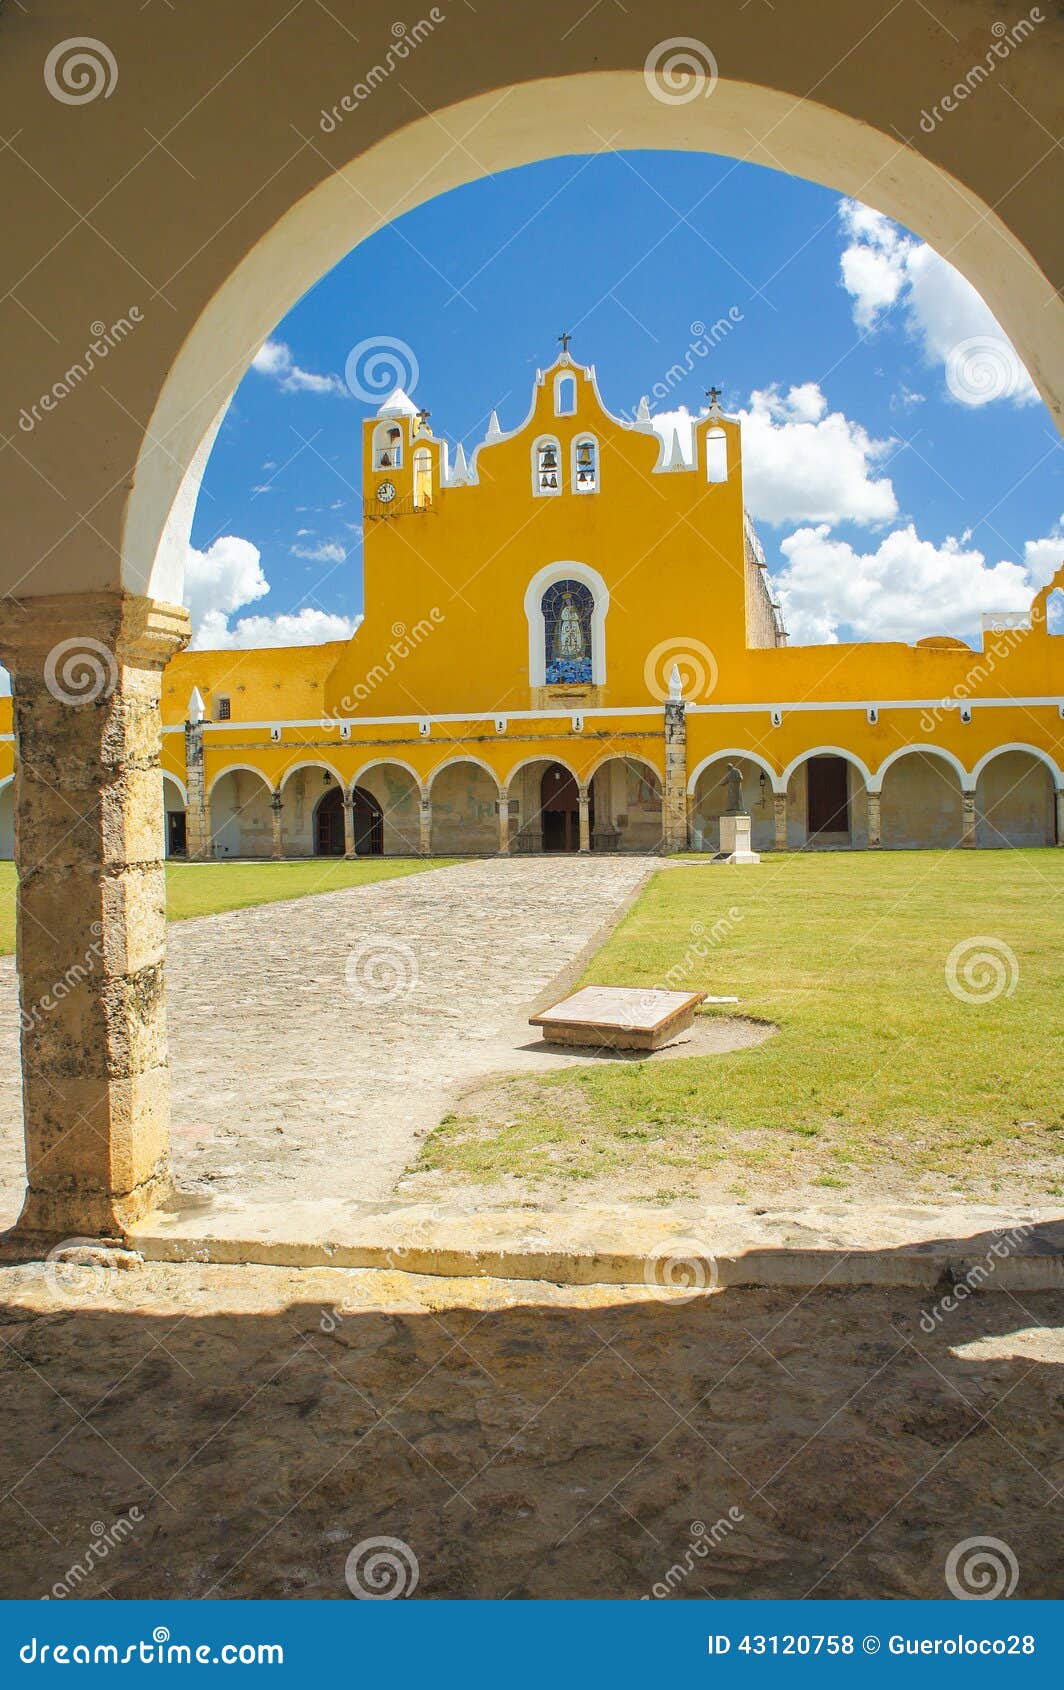 mexican cathedral izamal, mexico